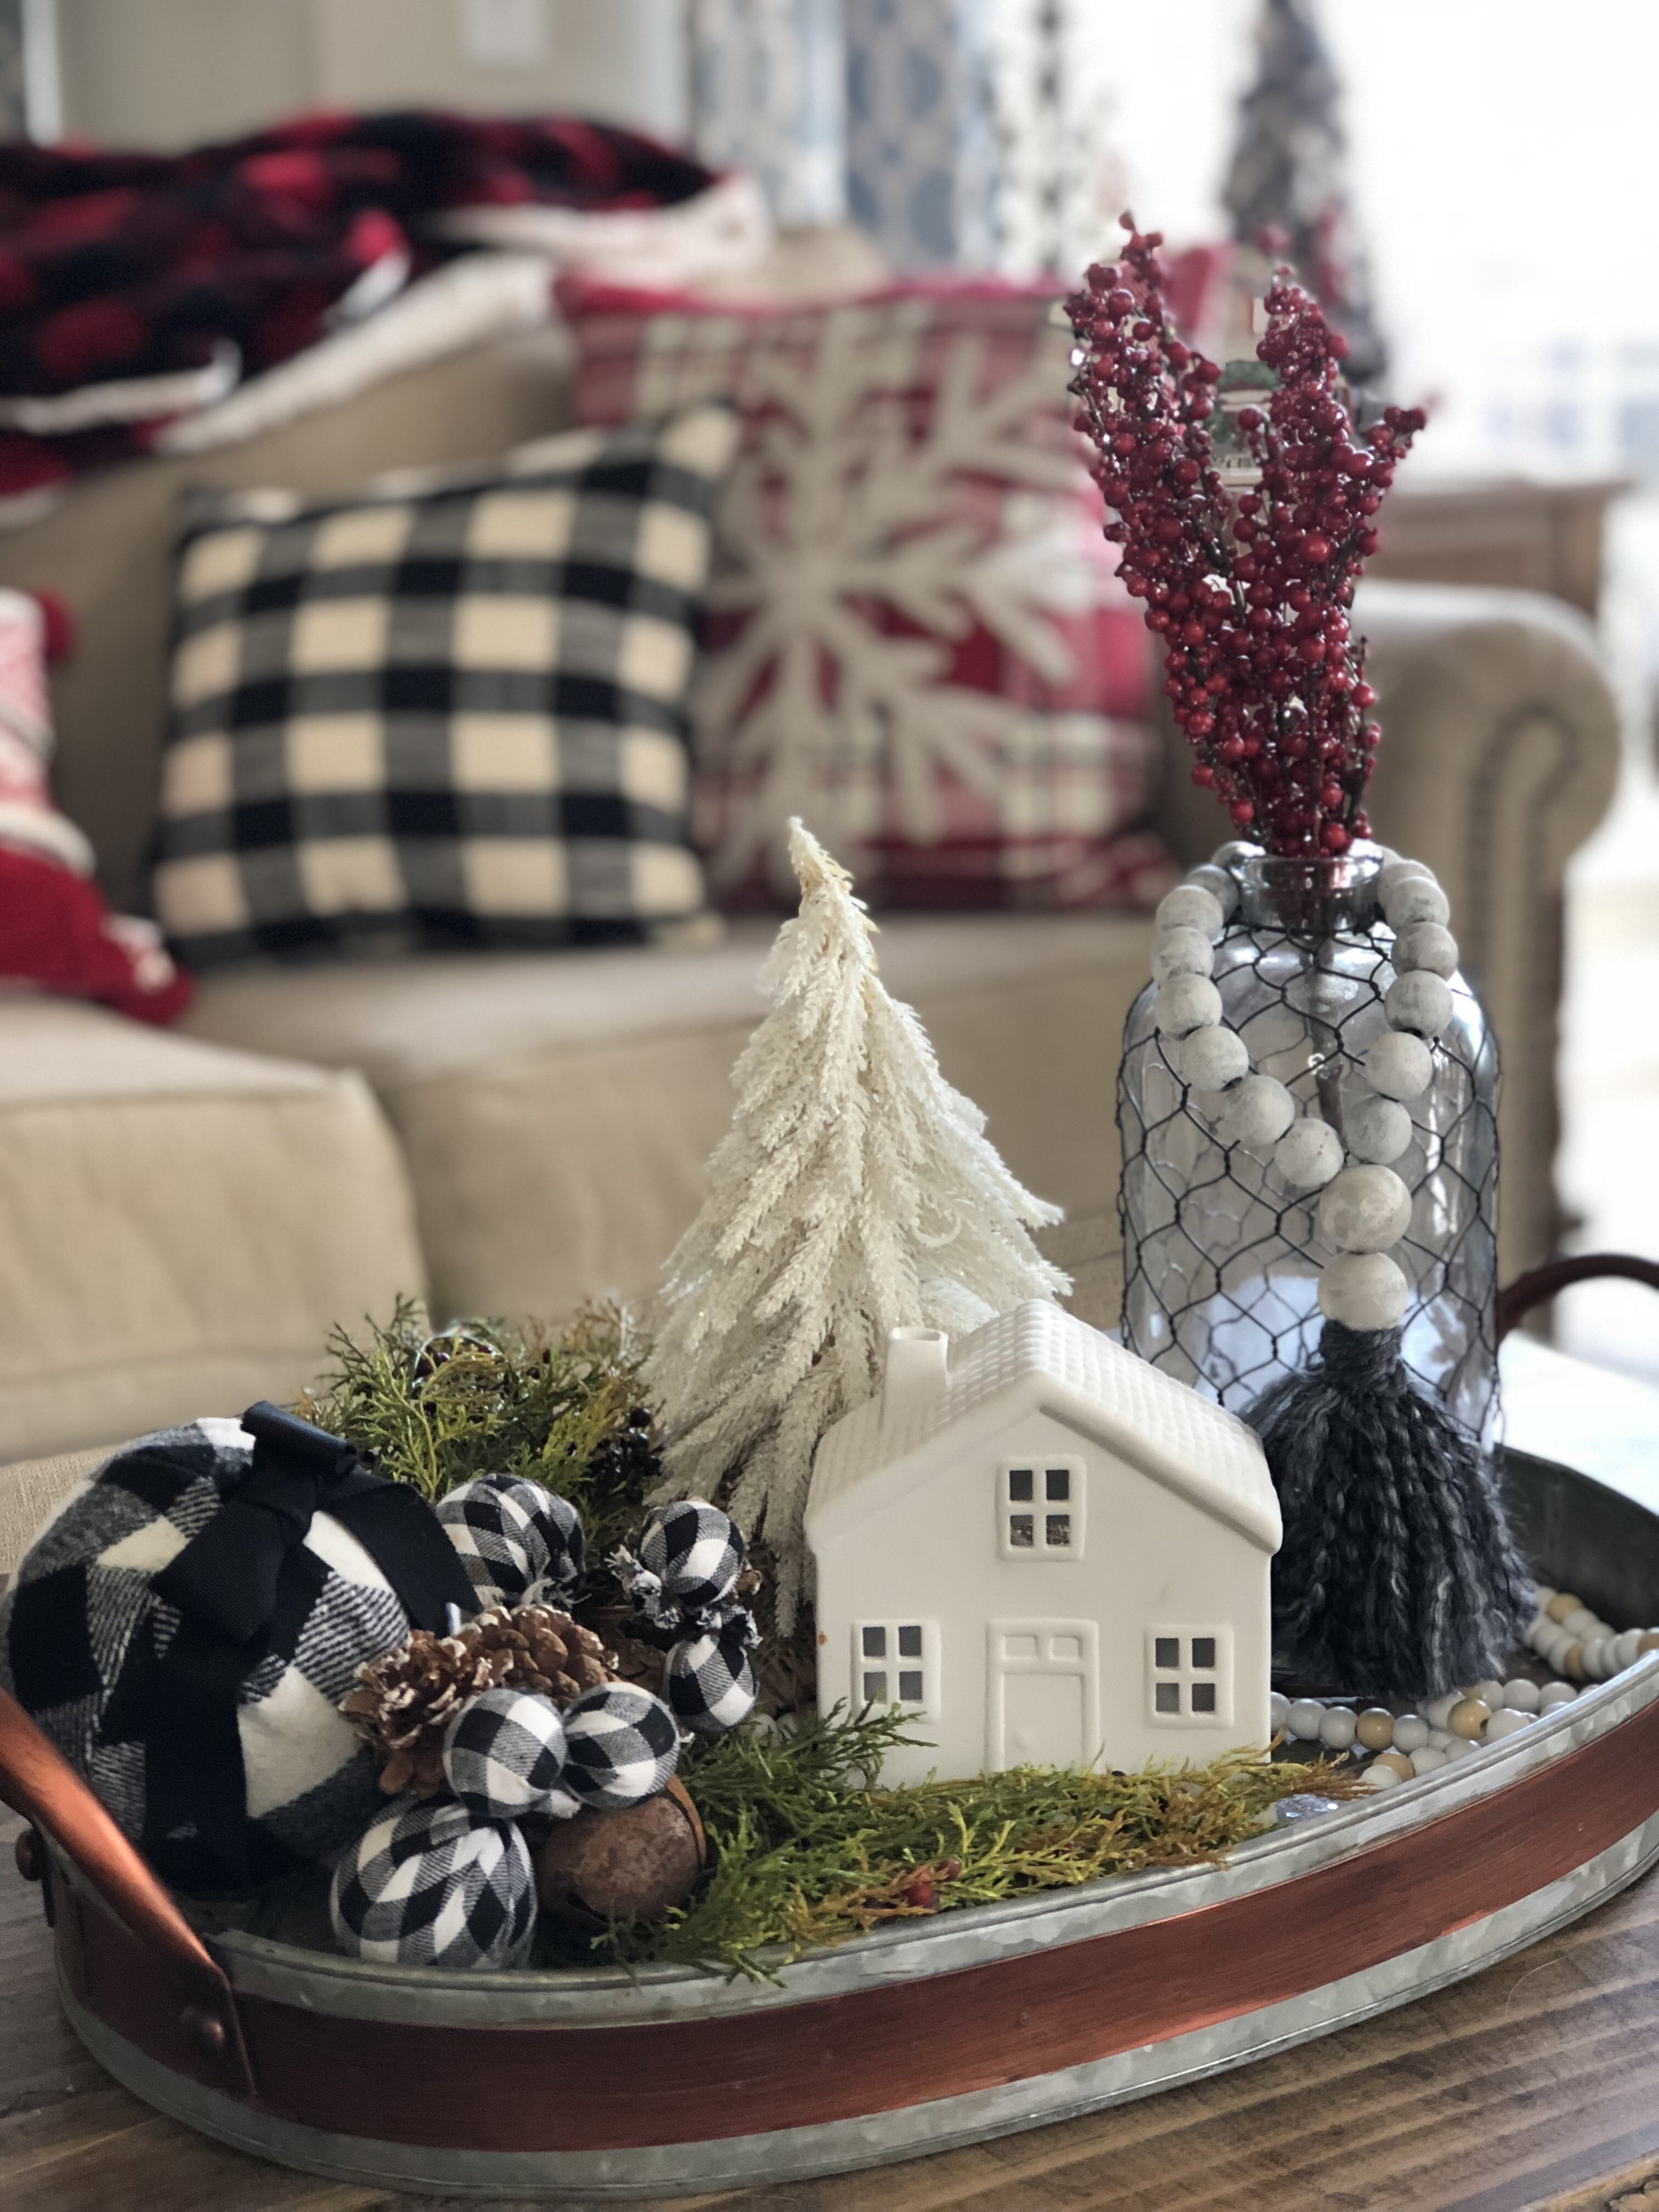 3 Christmas tray ideas for your home this holiday season!